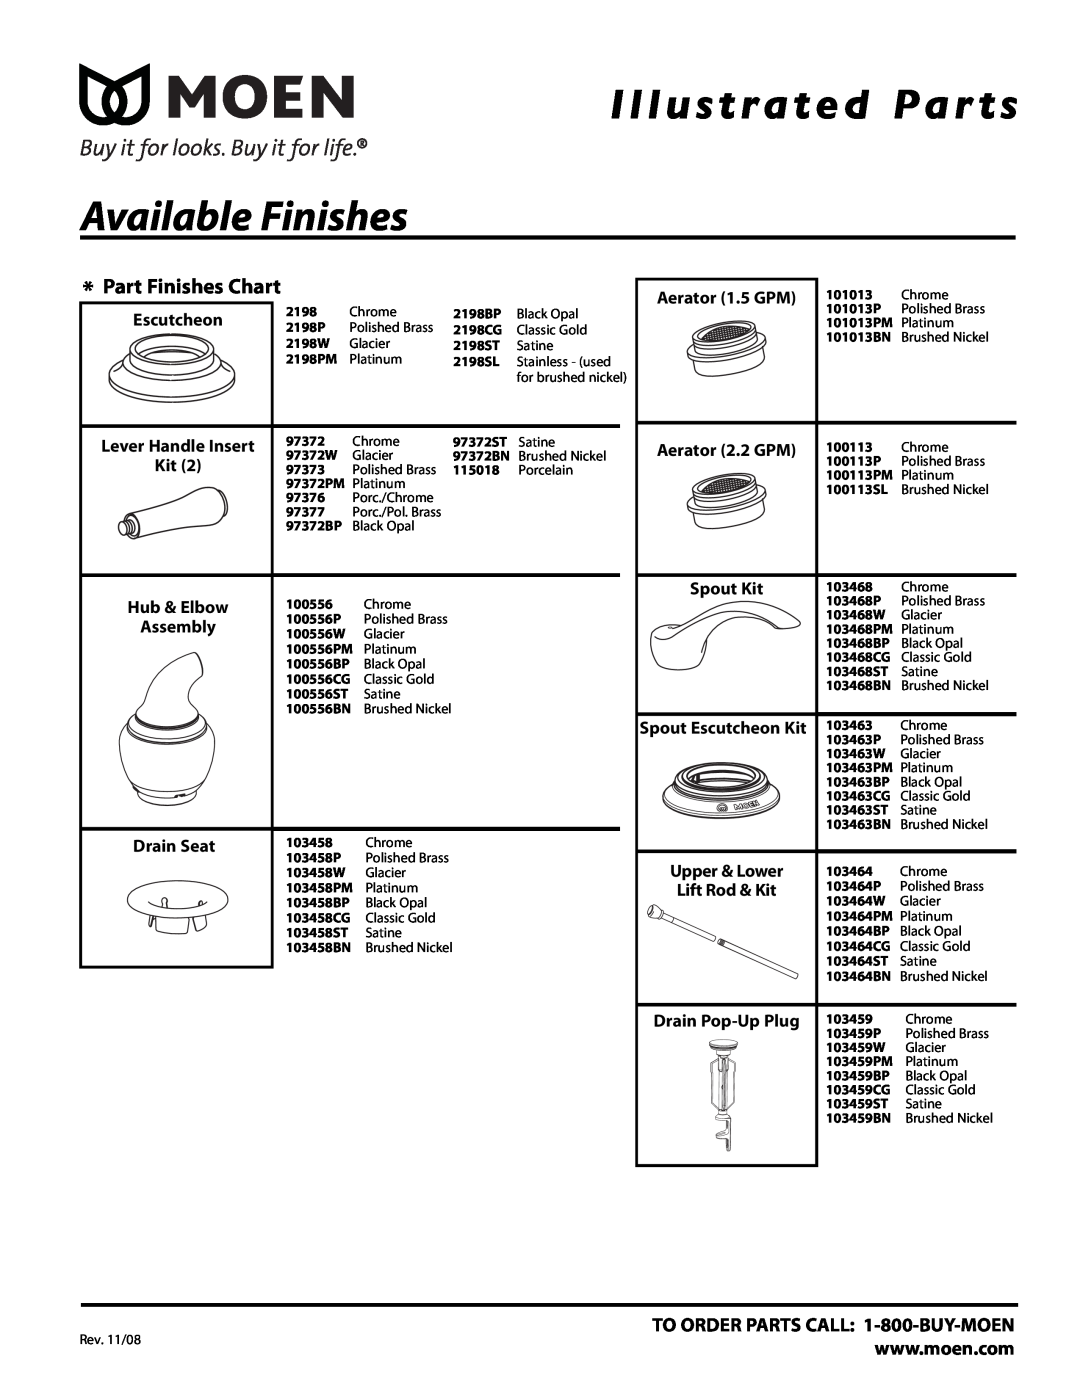 Moen 84246, 6600BN manual Part Finishes Chart, Drain Seat, Spout Escutcheon Kit, Illustrated Par ts, Available Finishes 